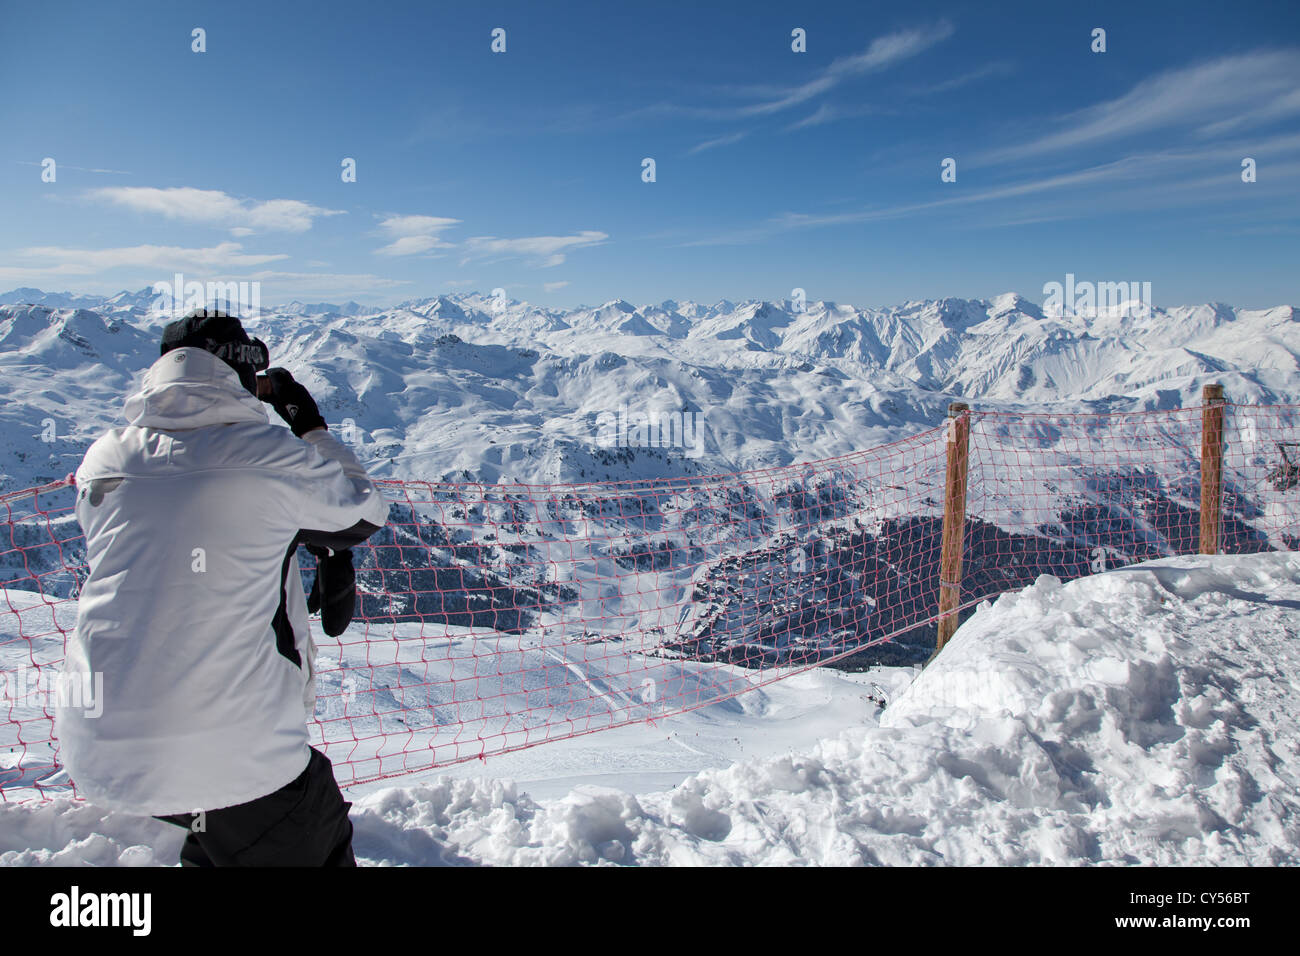 French Alps at the 3 vallees ski resort Stock Photo